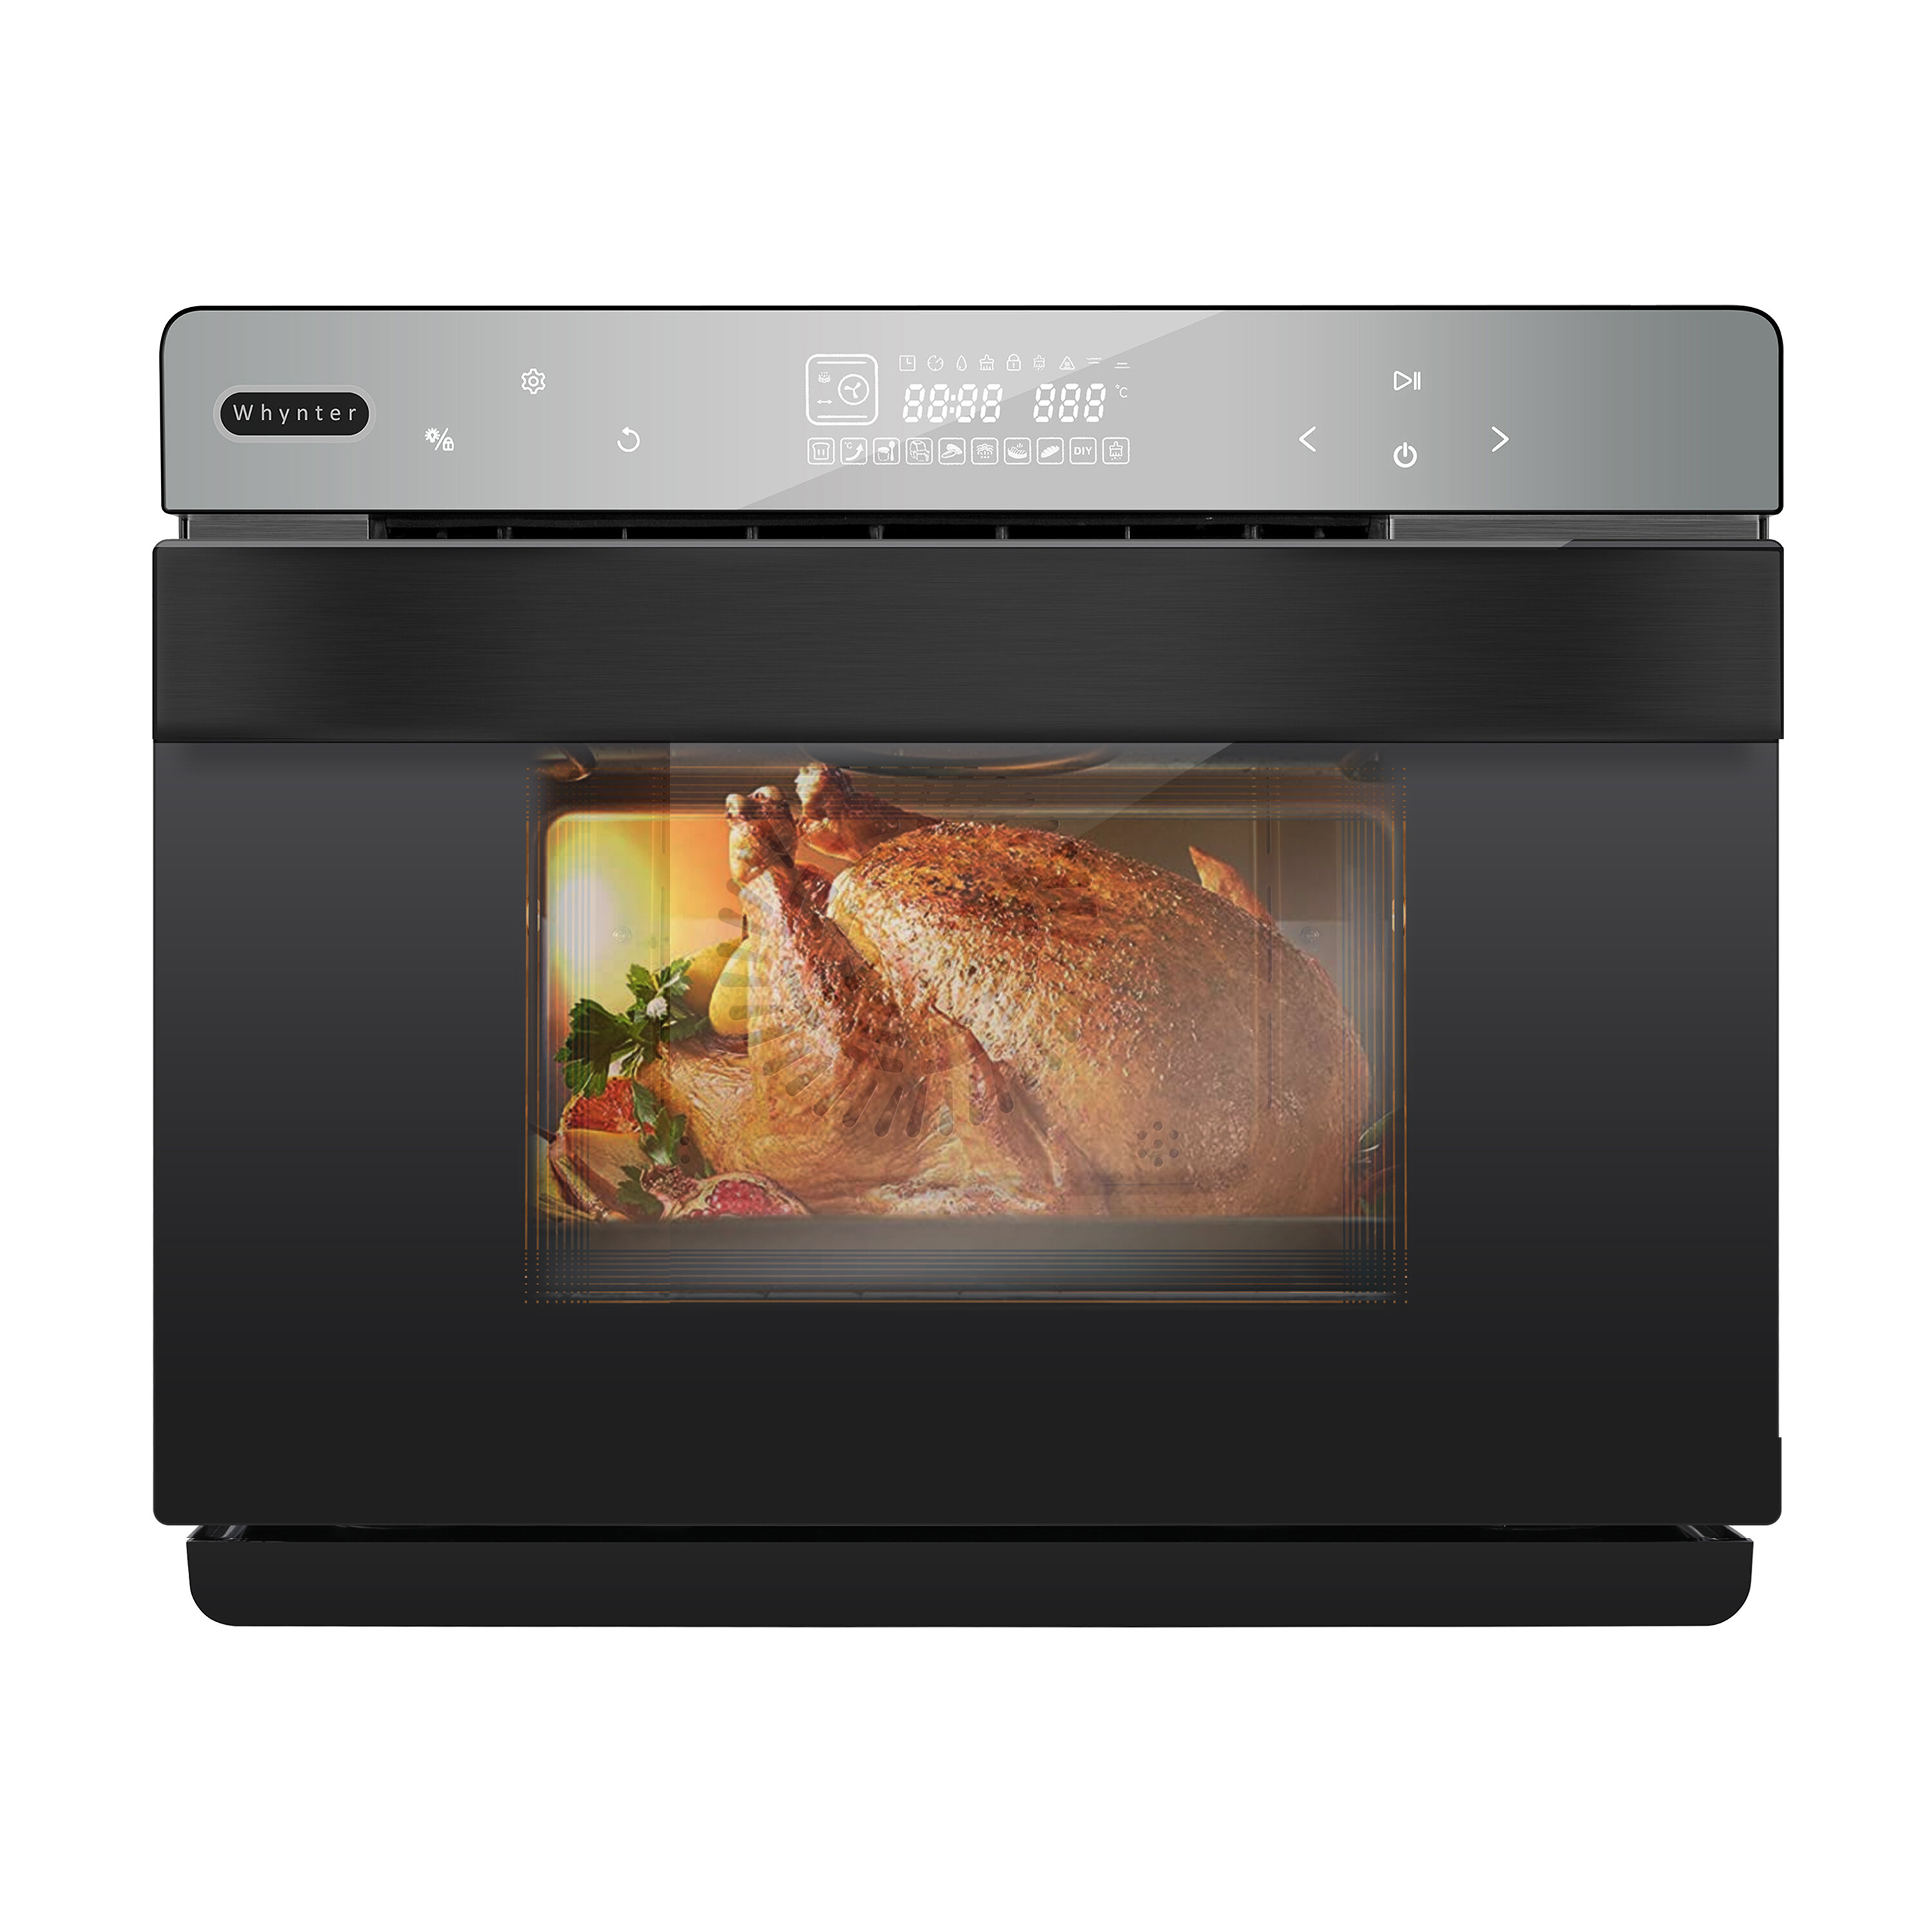 Steam Air Fryer Toaster Oven Combo, 26 QT Steam Convection Oven, 6